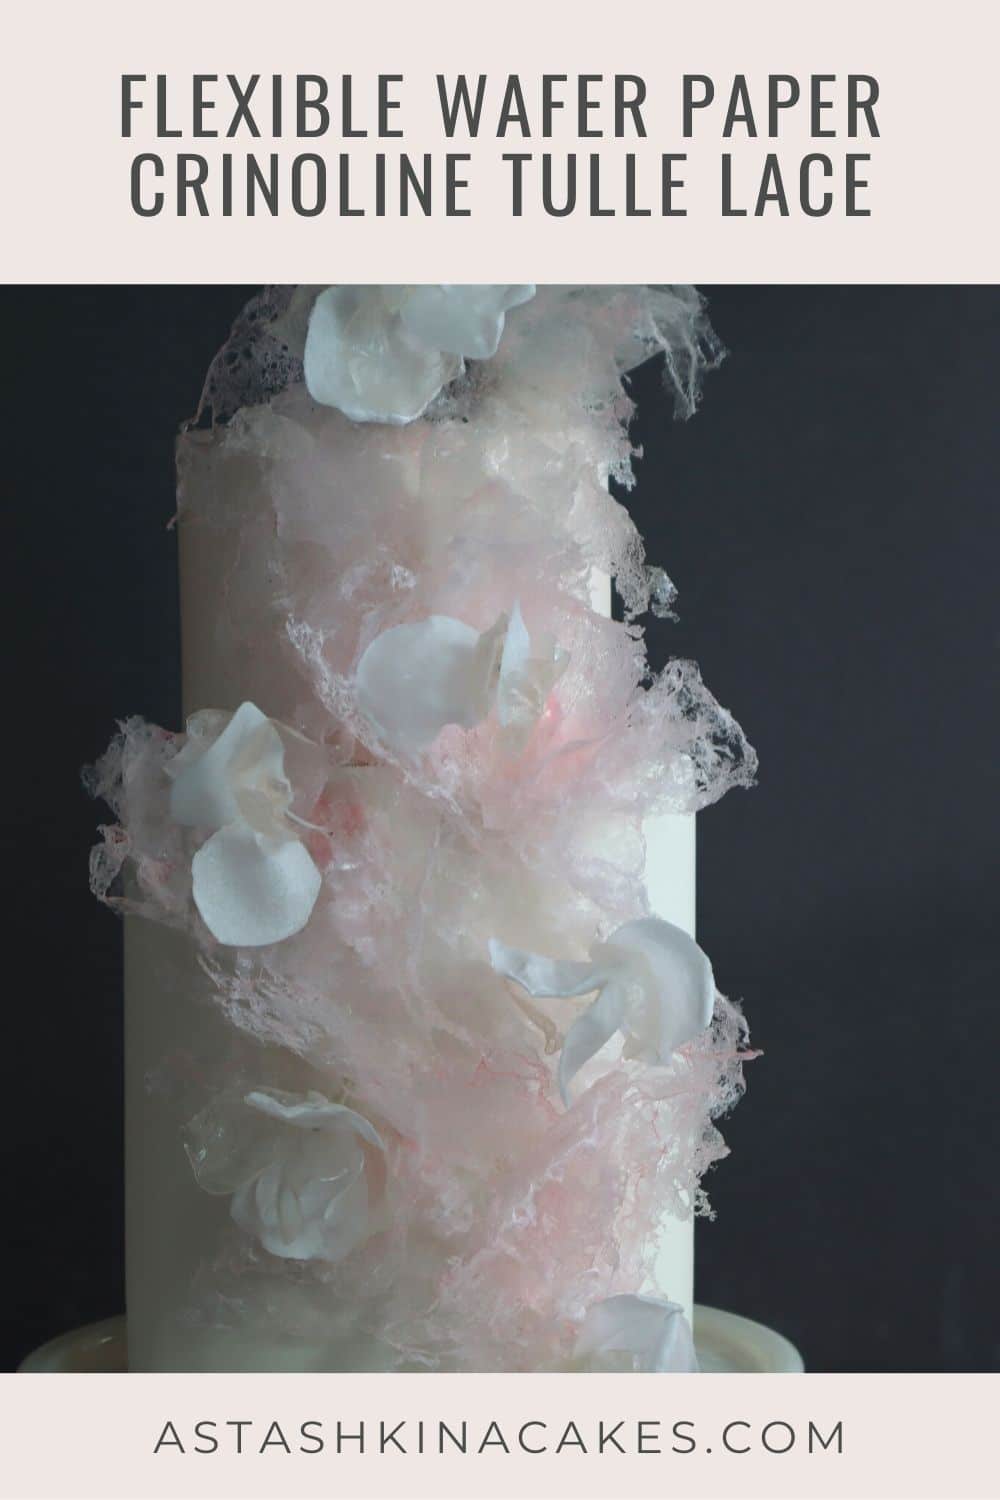 How to make wafer paper flexible crinoline tulle lace